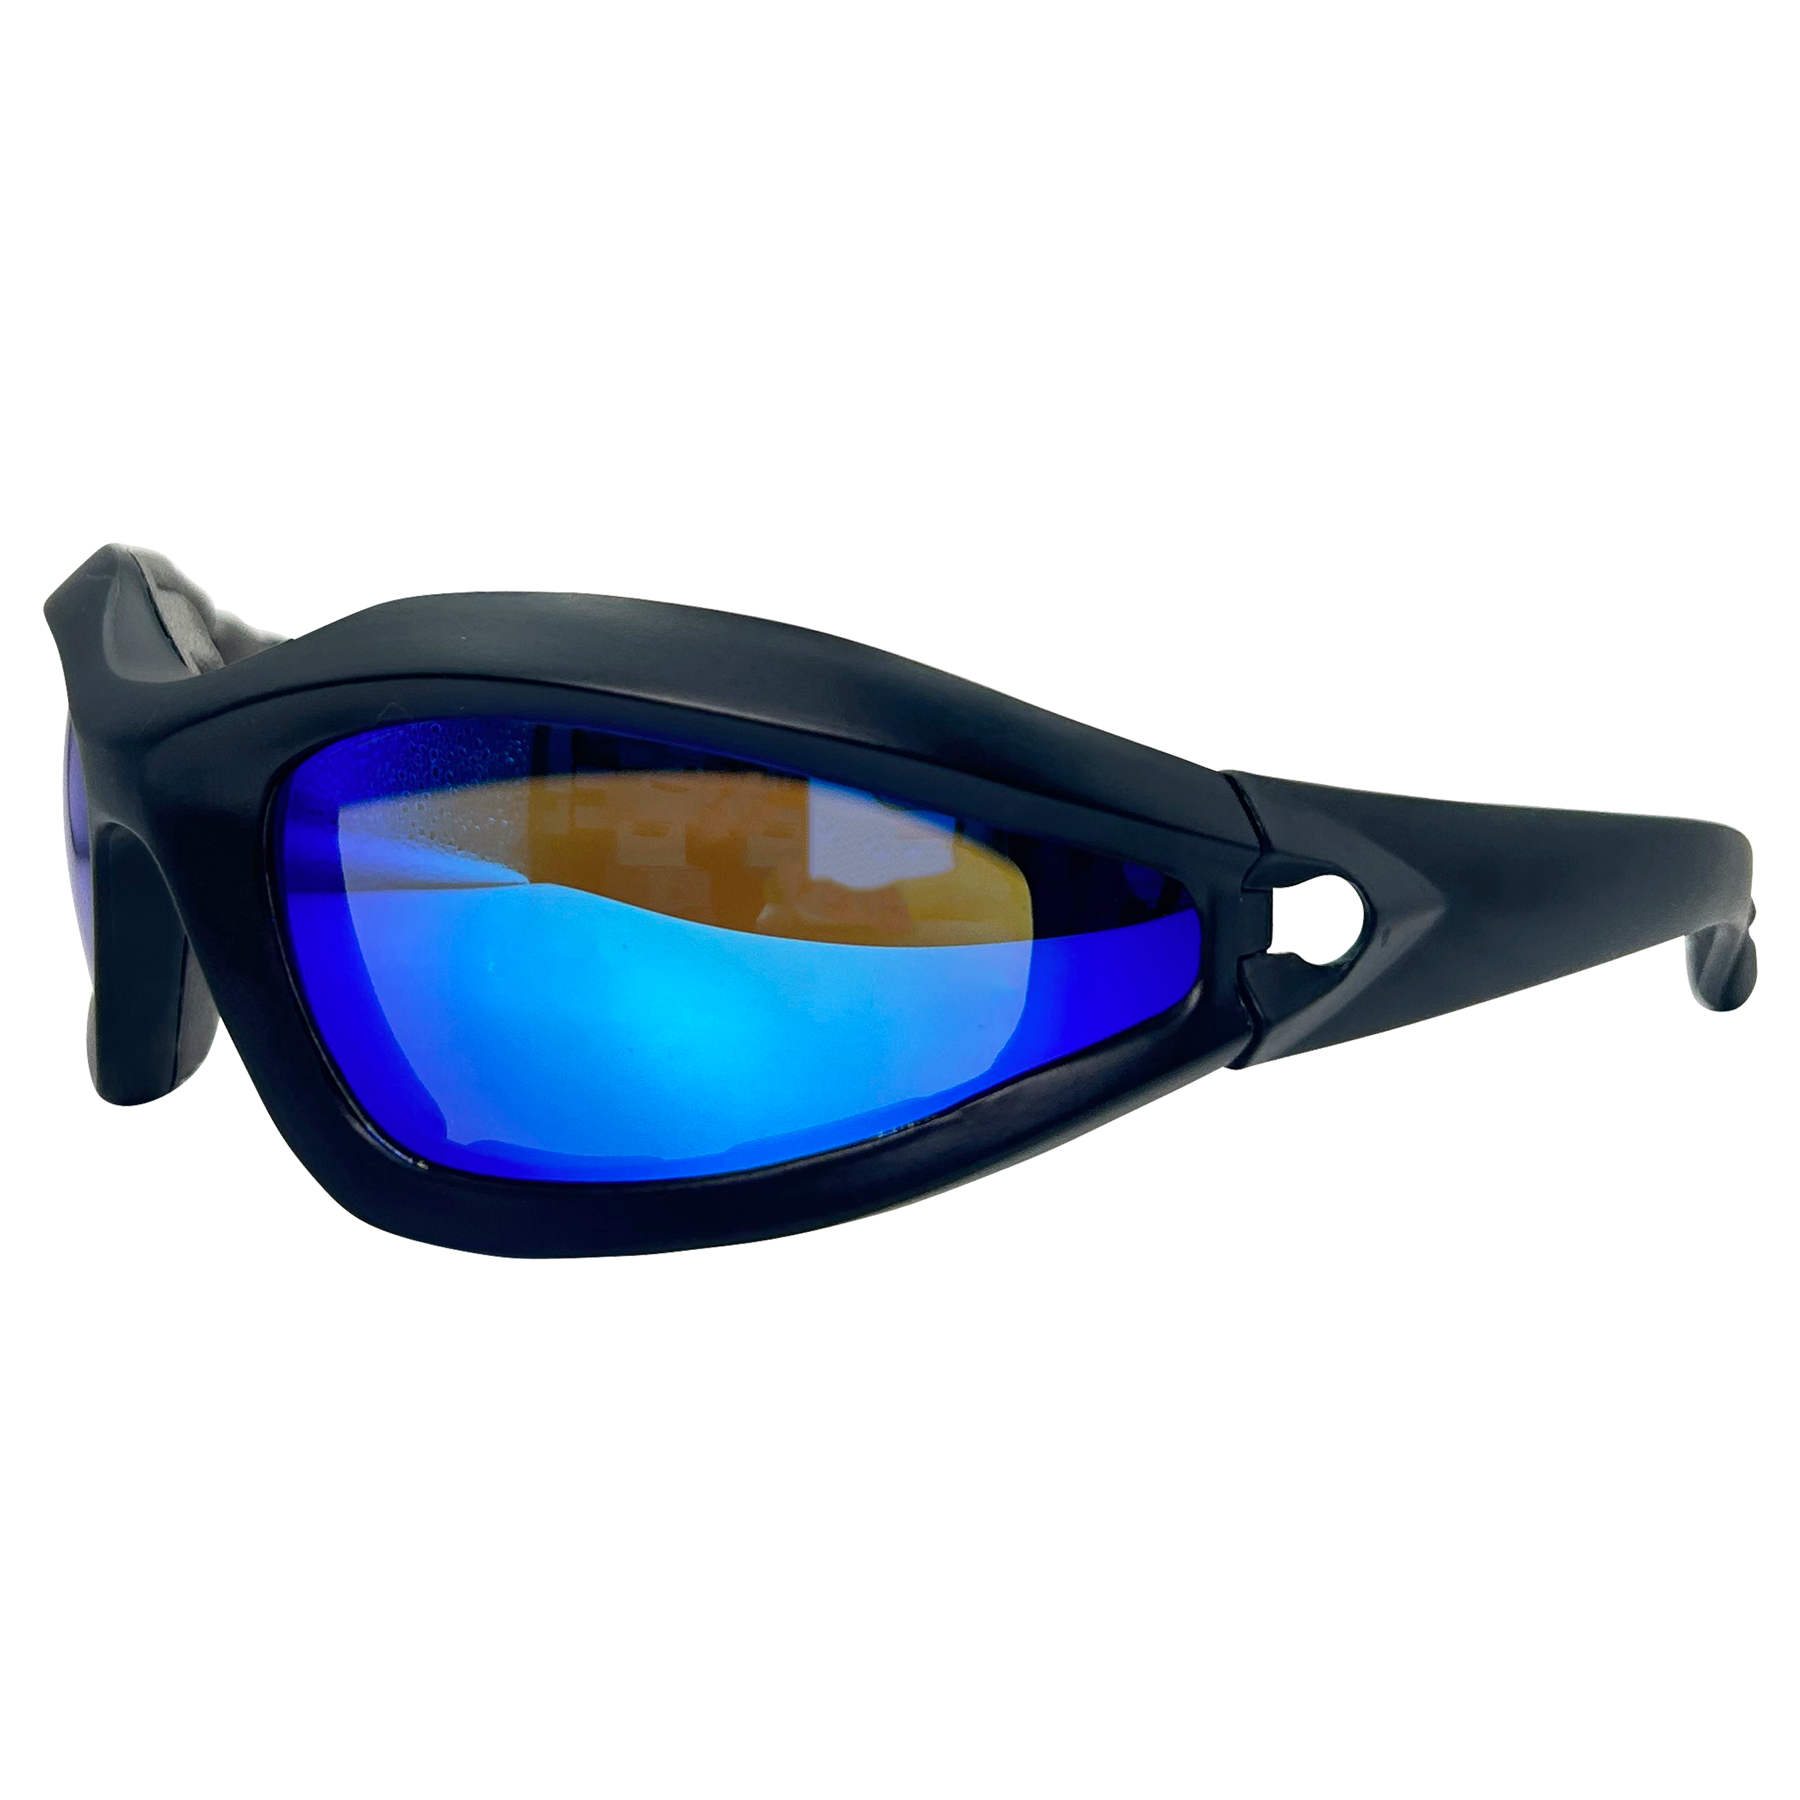 mirrored men's sunglasses and unisex sunglasses with blue RV lens, sports shield style